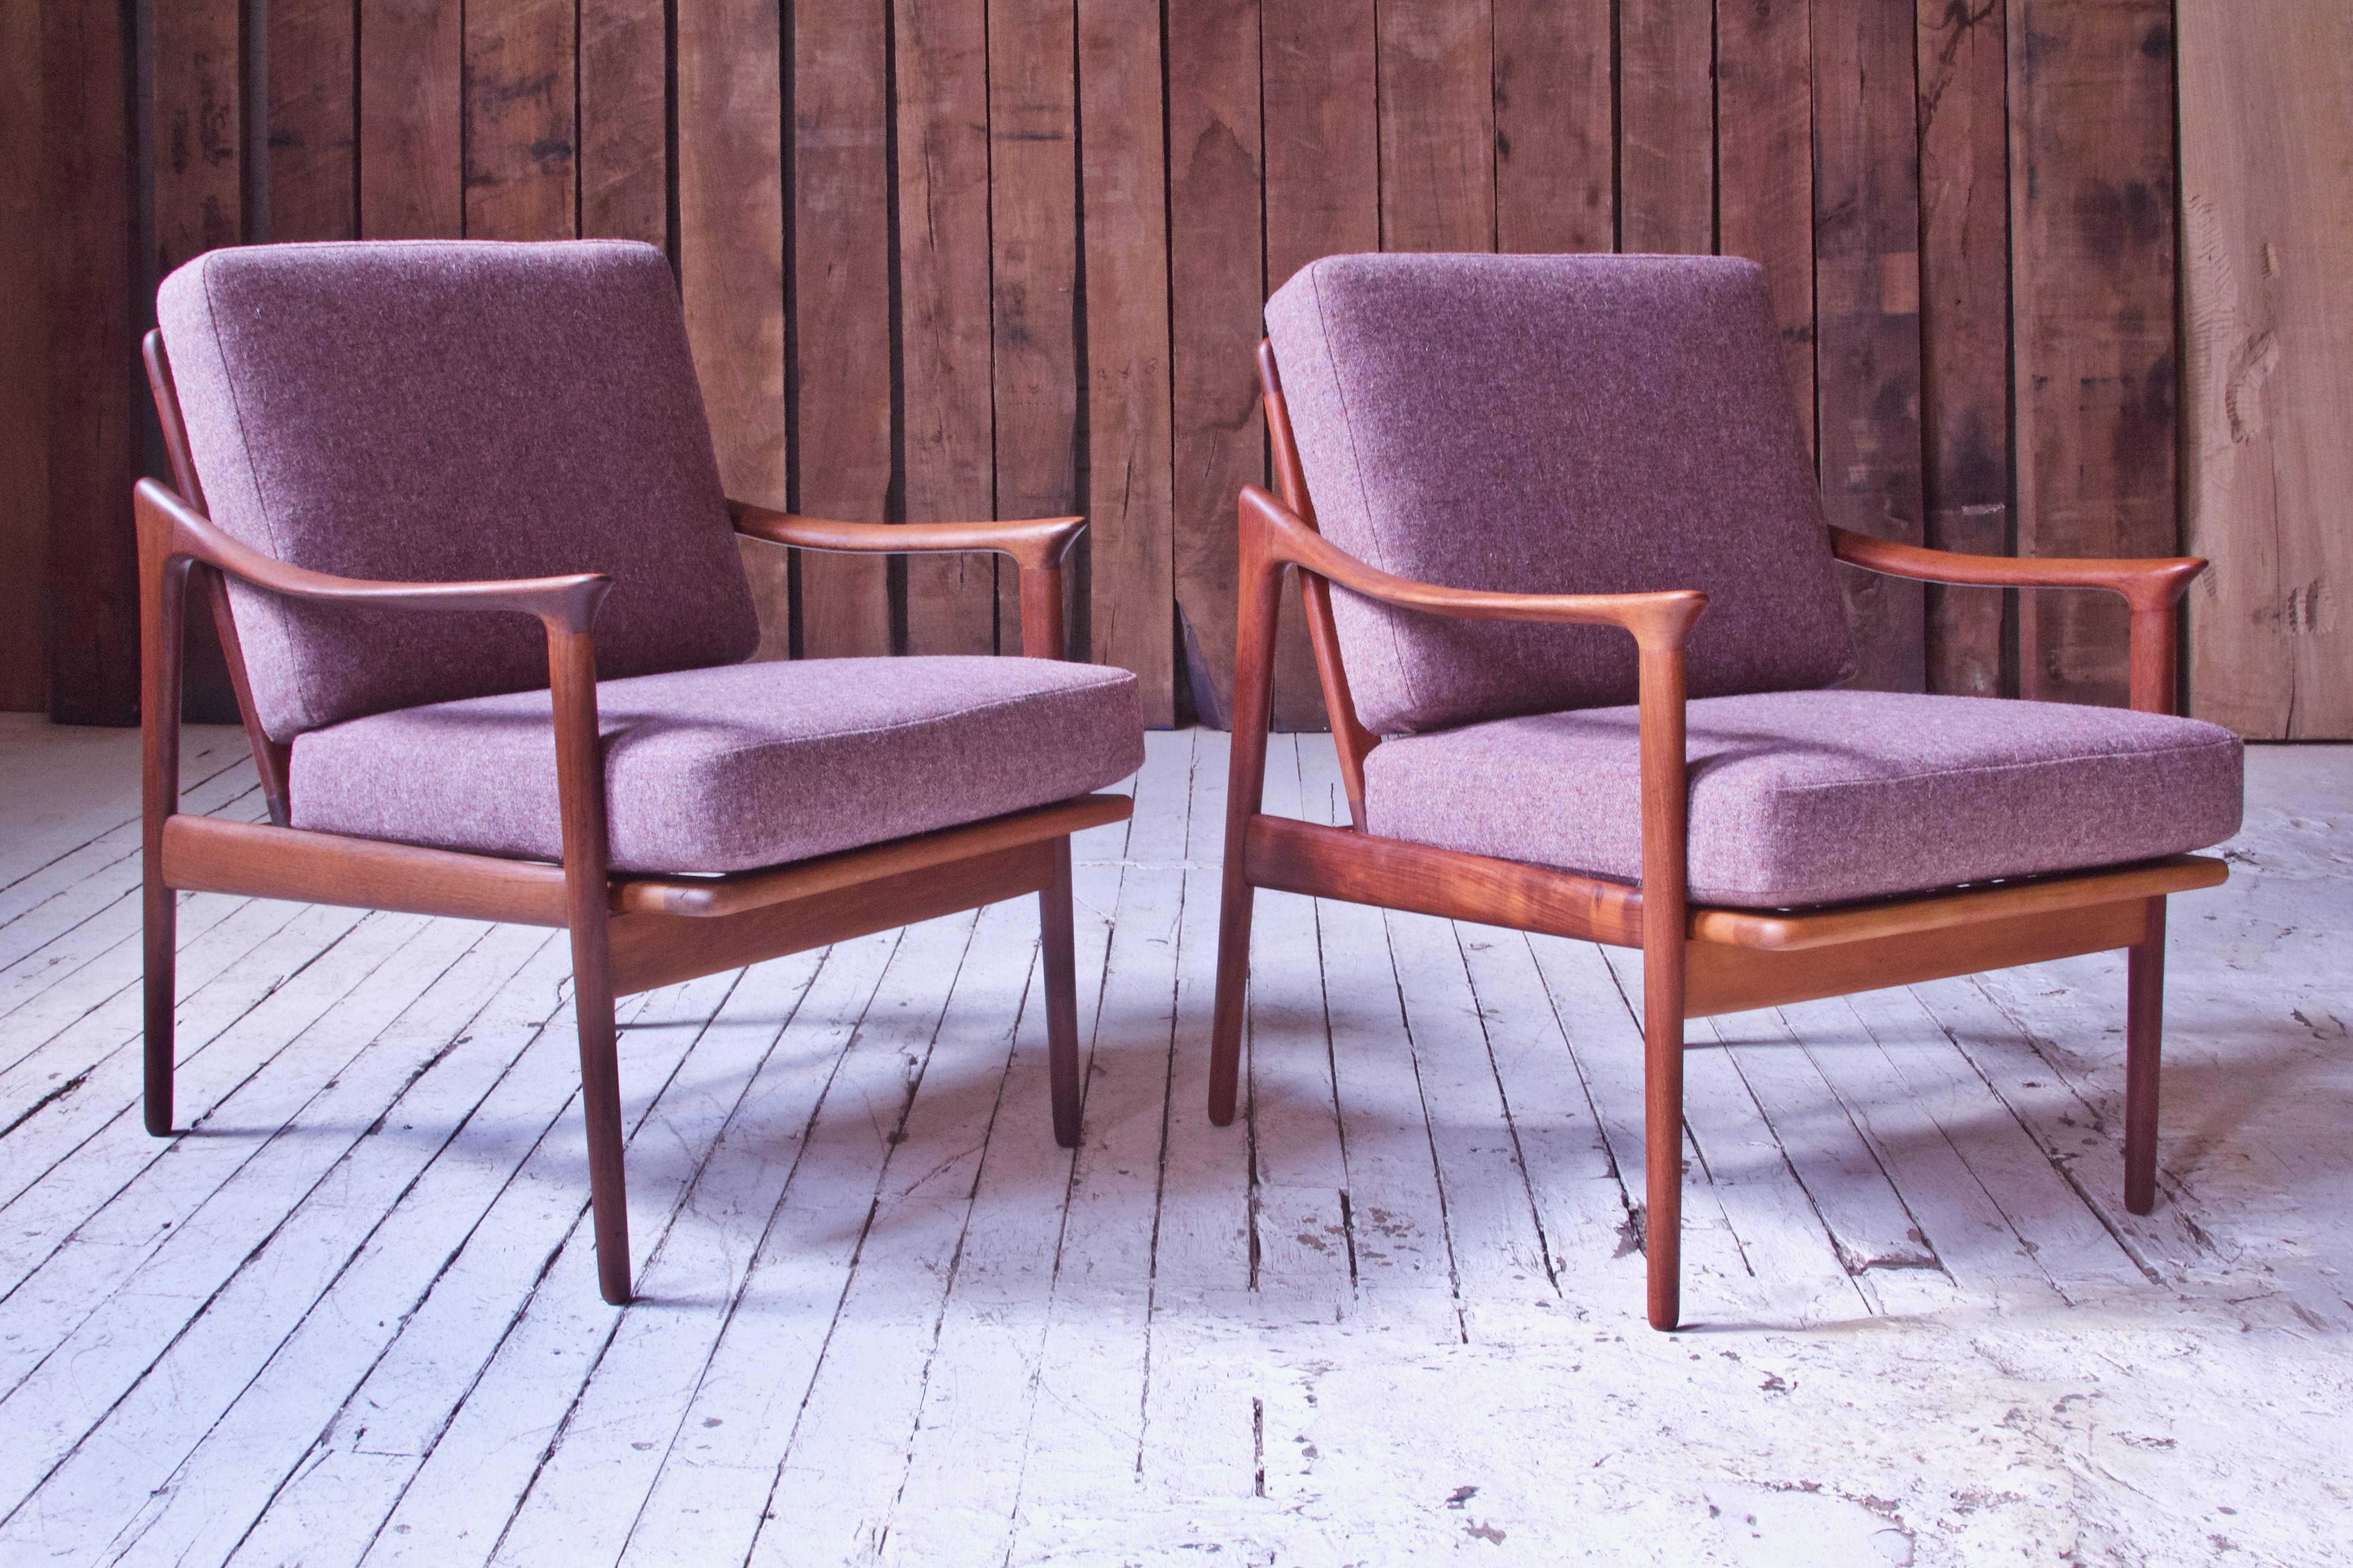 Well-proportioned pair of vintage Scandinavian easy chairs in teak and wool by the celebrated Norwegian designer Fredrick A. Kayser (1924-1968). This iteration of his model 563 for Vatne Lenestolfabrikk, was likely modified for flat-pack export